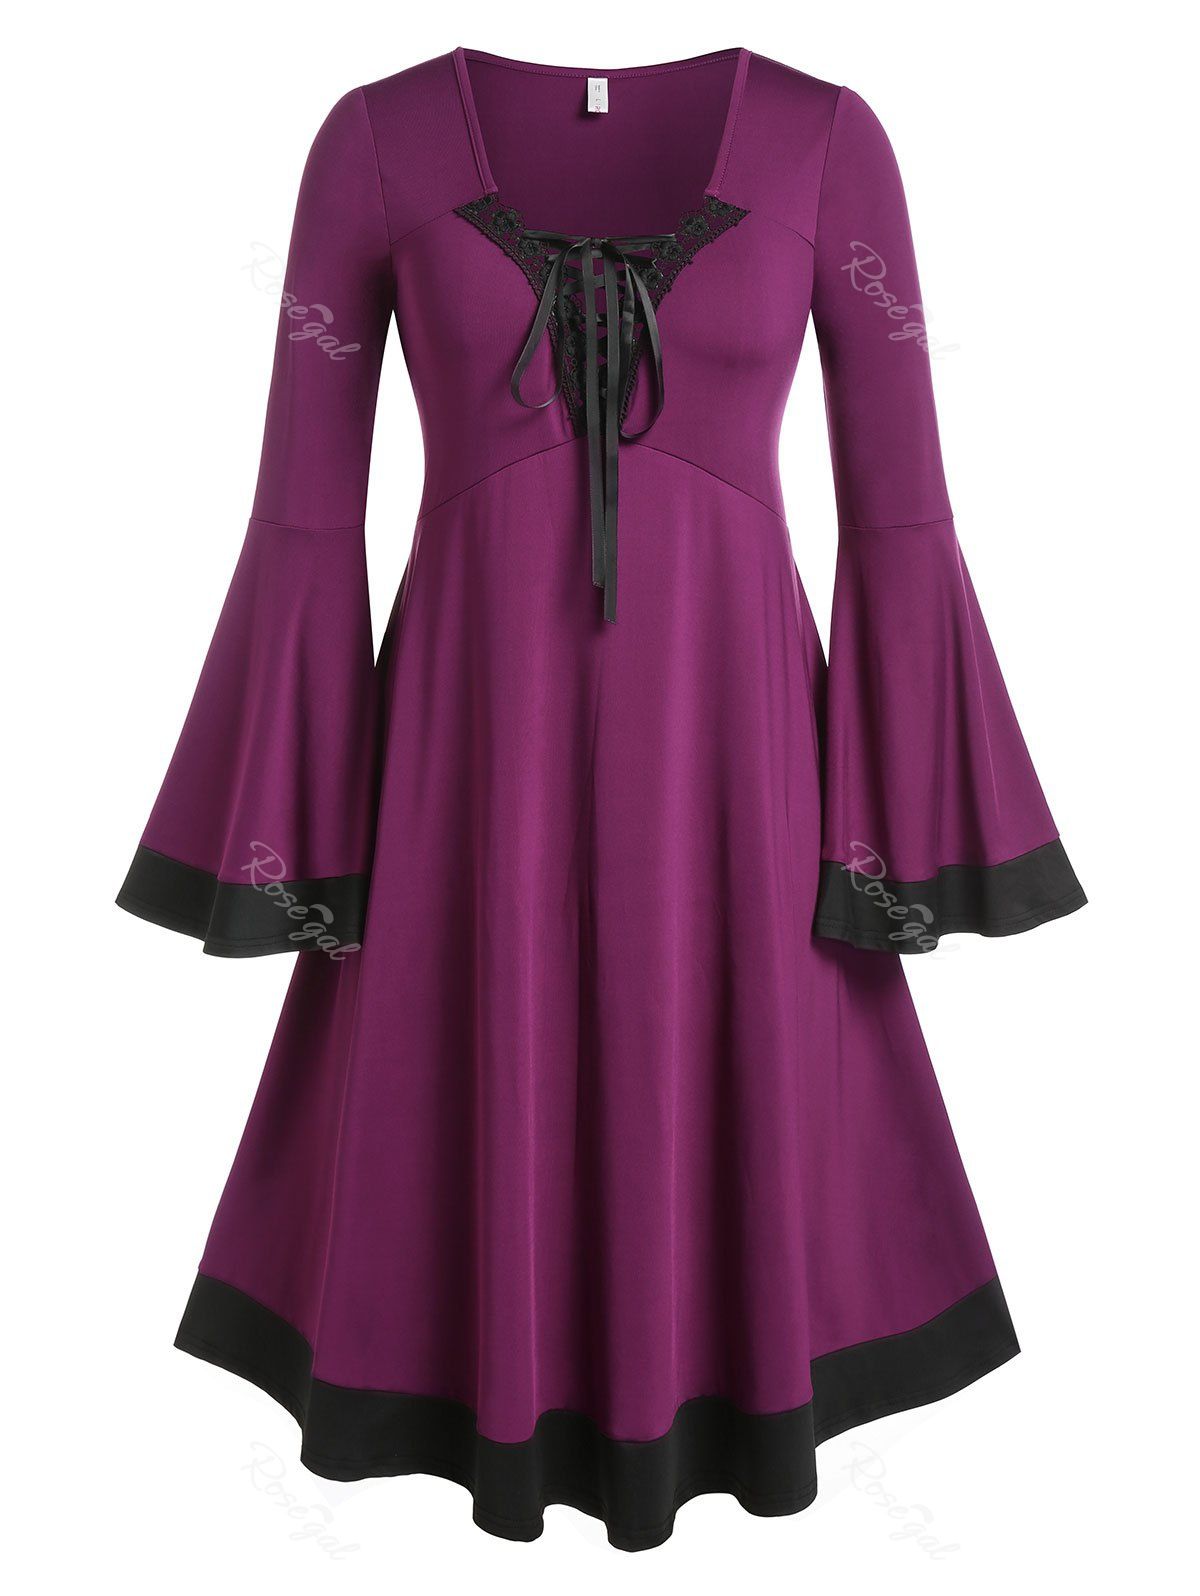 Fancy Plus Size Lace Up Floral Crochet Flare Sleeve Gothic Midi Dress  